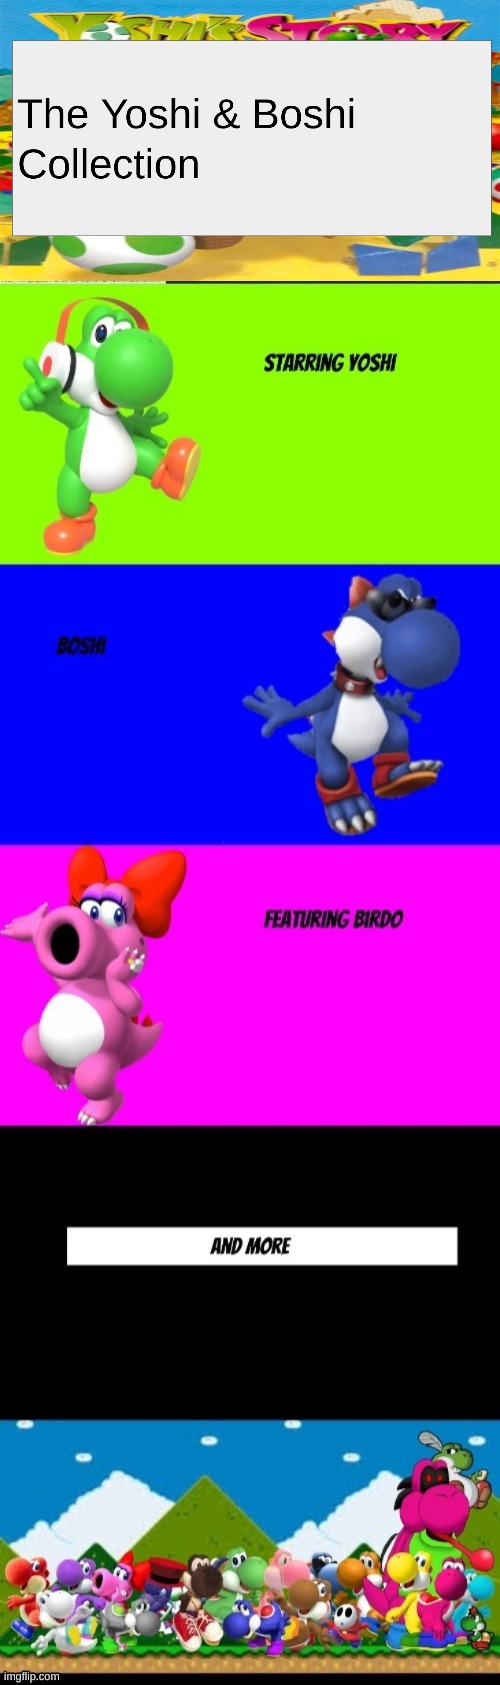 The Yoshi & Boshi Collection Intro(For Incredible_Memes) | made w/ Imgflip meme maker